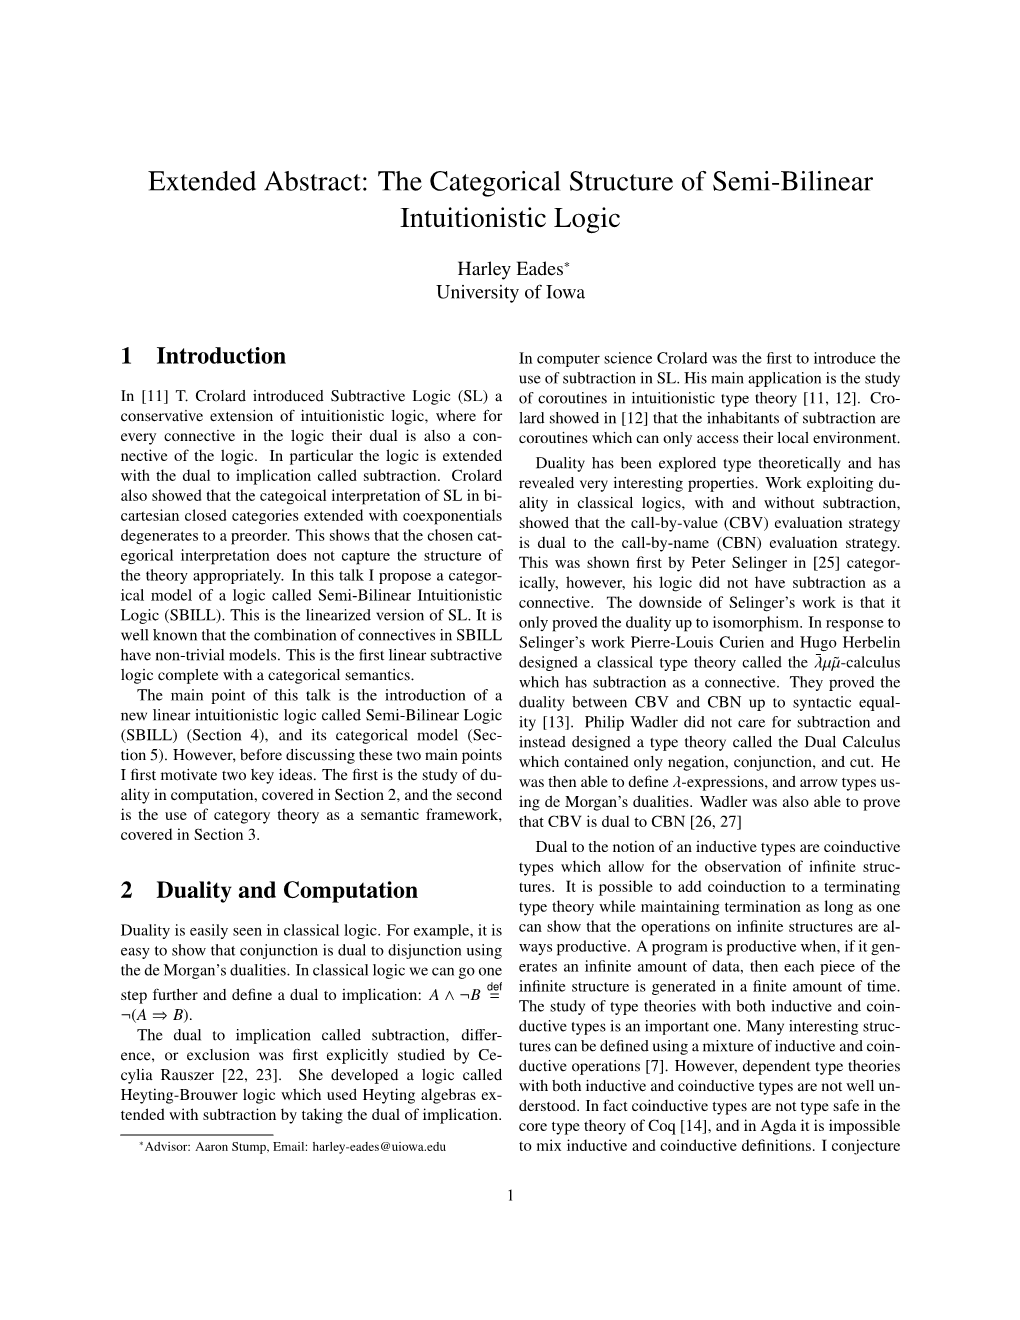 Extended Abstract: the Categorical Structure of Semi-Bilinear Intuitionistic Logic